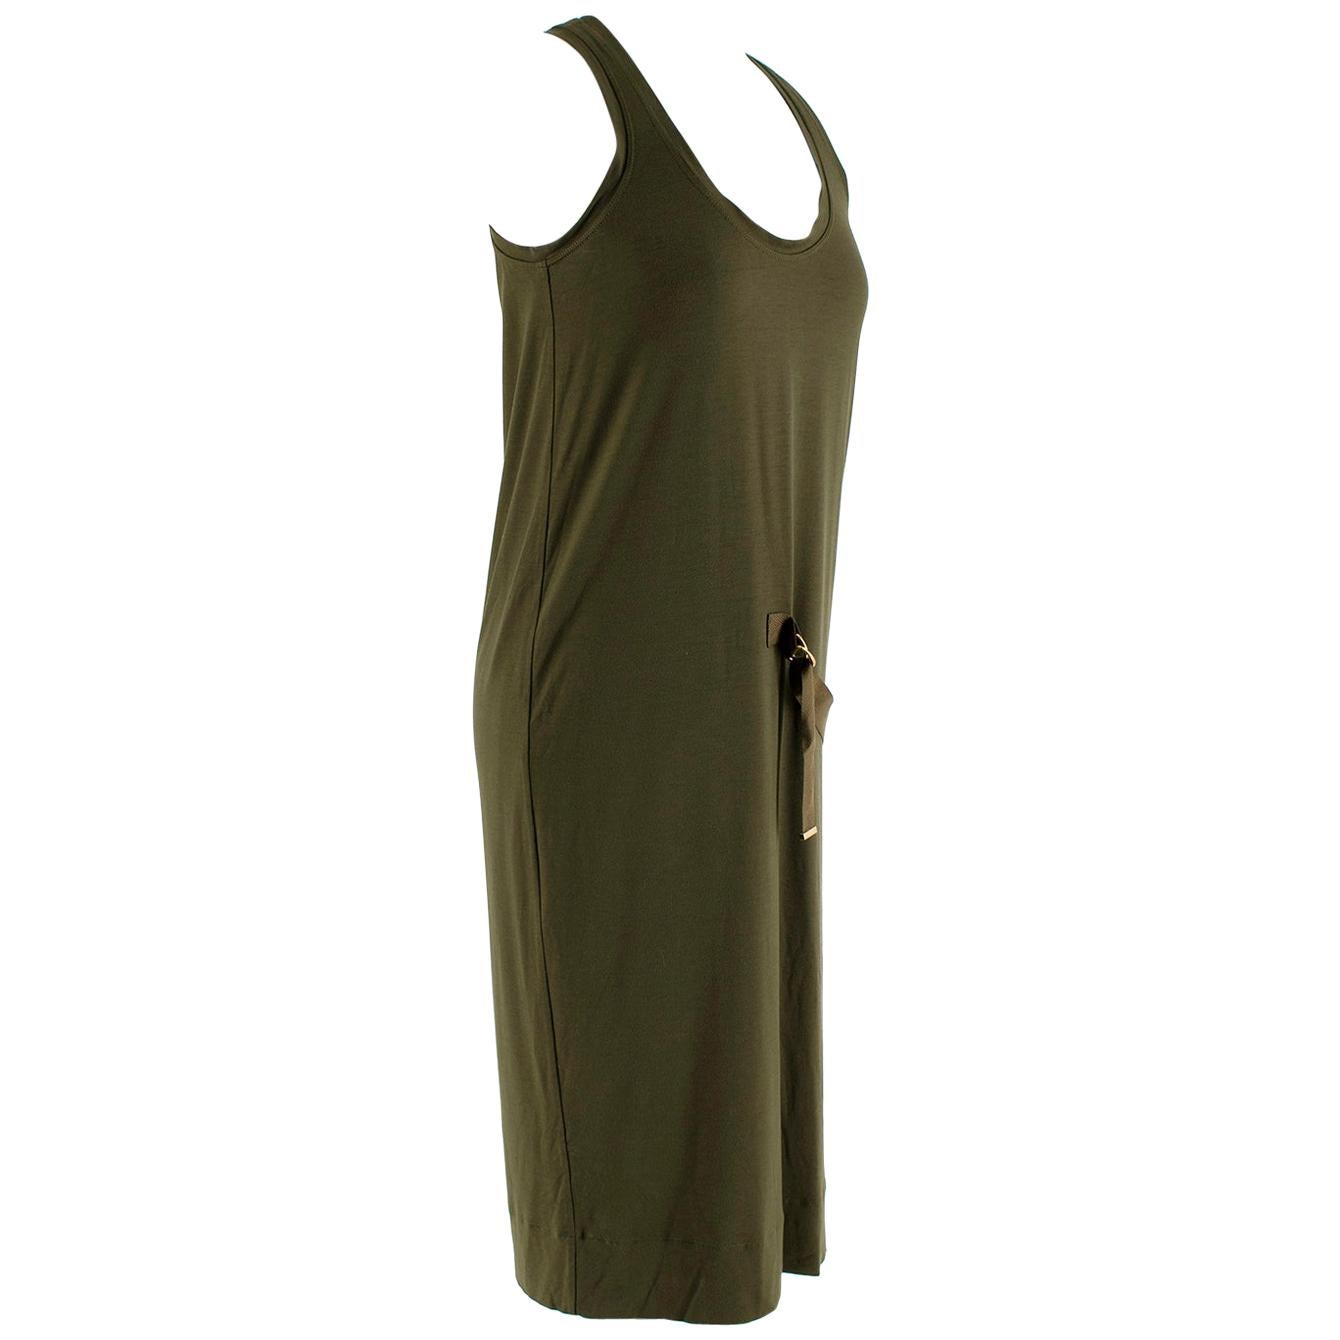 Tom Ford Khaki D-Ring Detail Shift Dress 

- Sleeveless With A Scoop Neckline 
- Heavyweight And Loose Fitting 
- Khaki Fabric Adjustable D-Buckle Detail 
- Gold Hardware 
- Pull-over
- Mid Length 

Material:
- 95% Viscose 
- 5% Elastane 

Made in